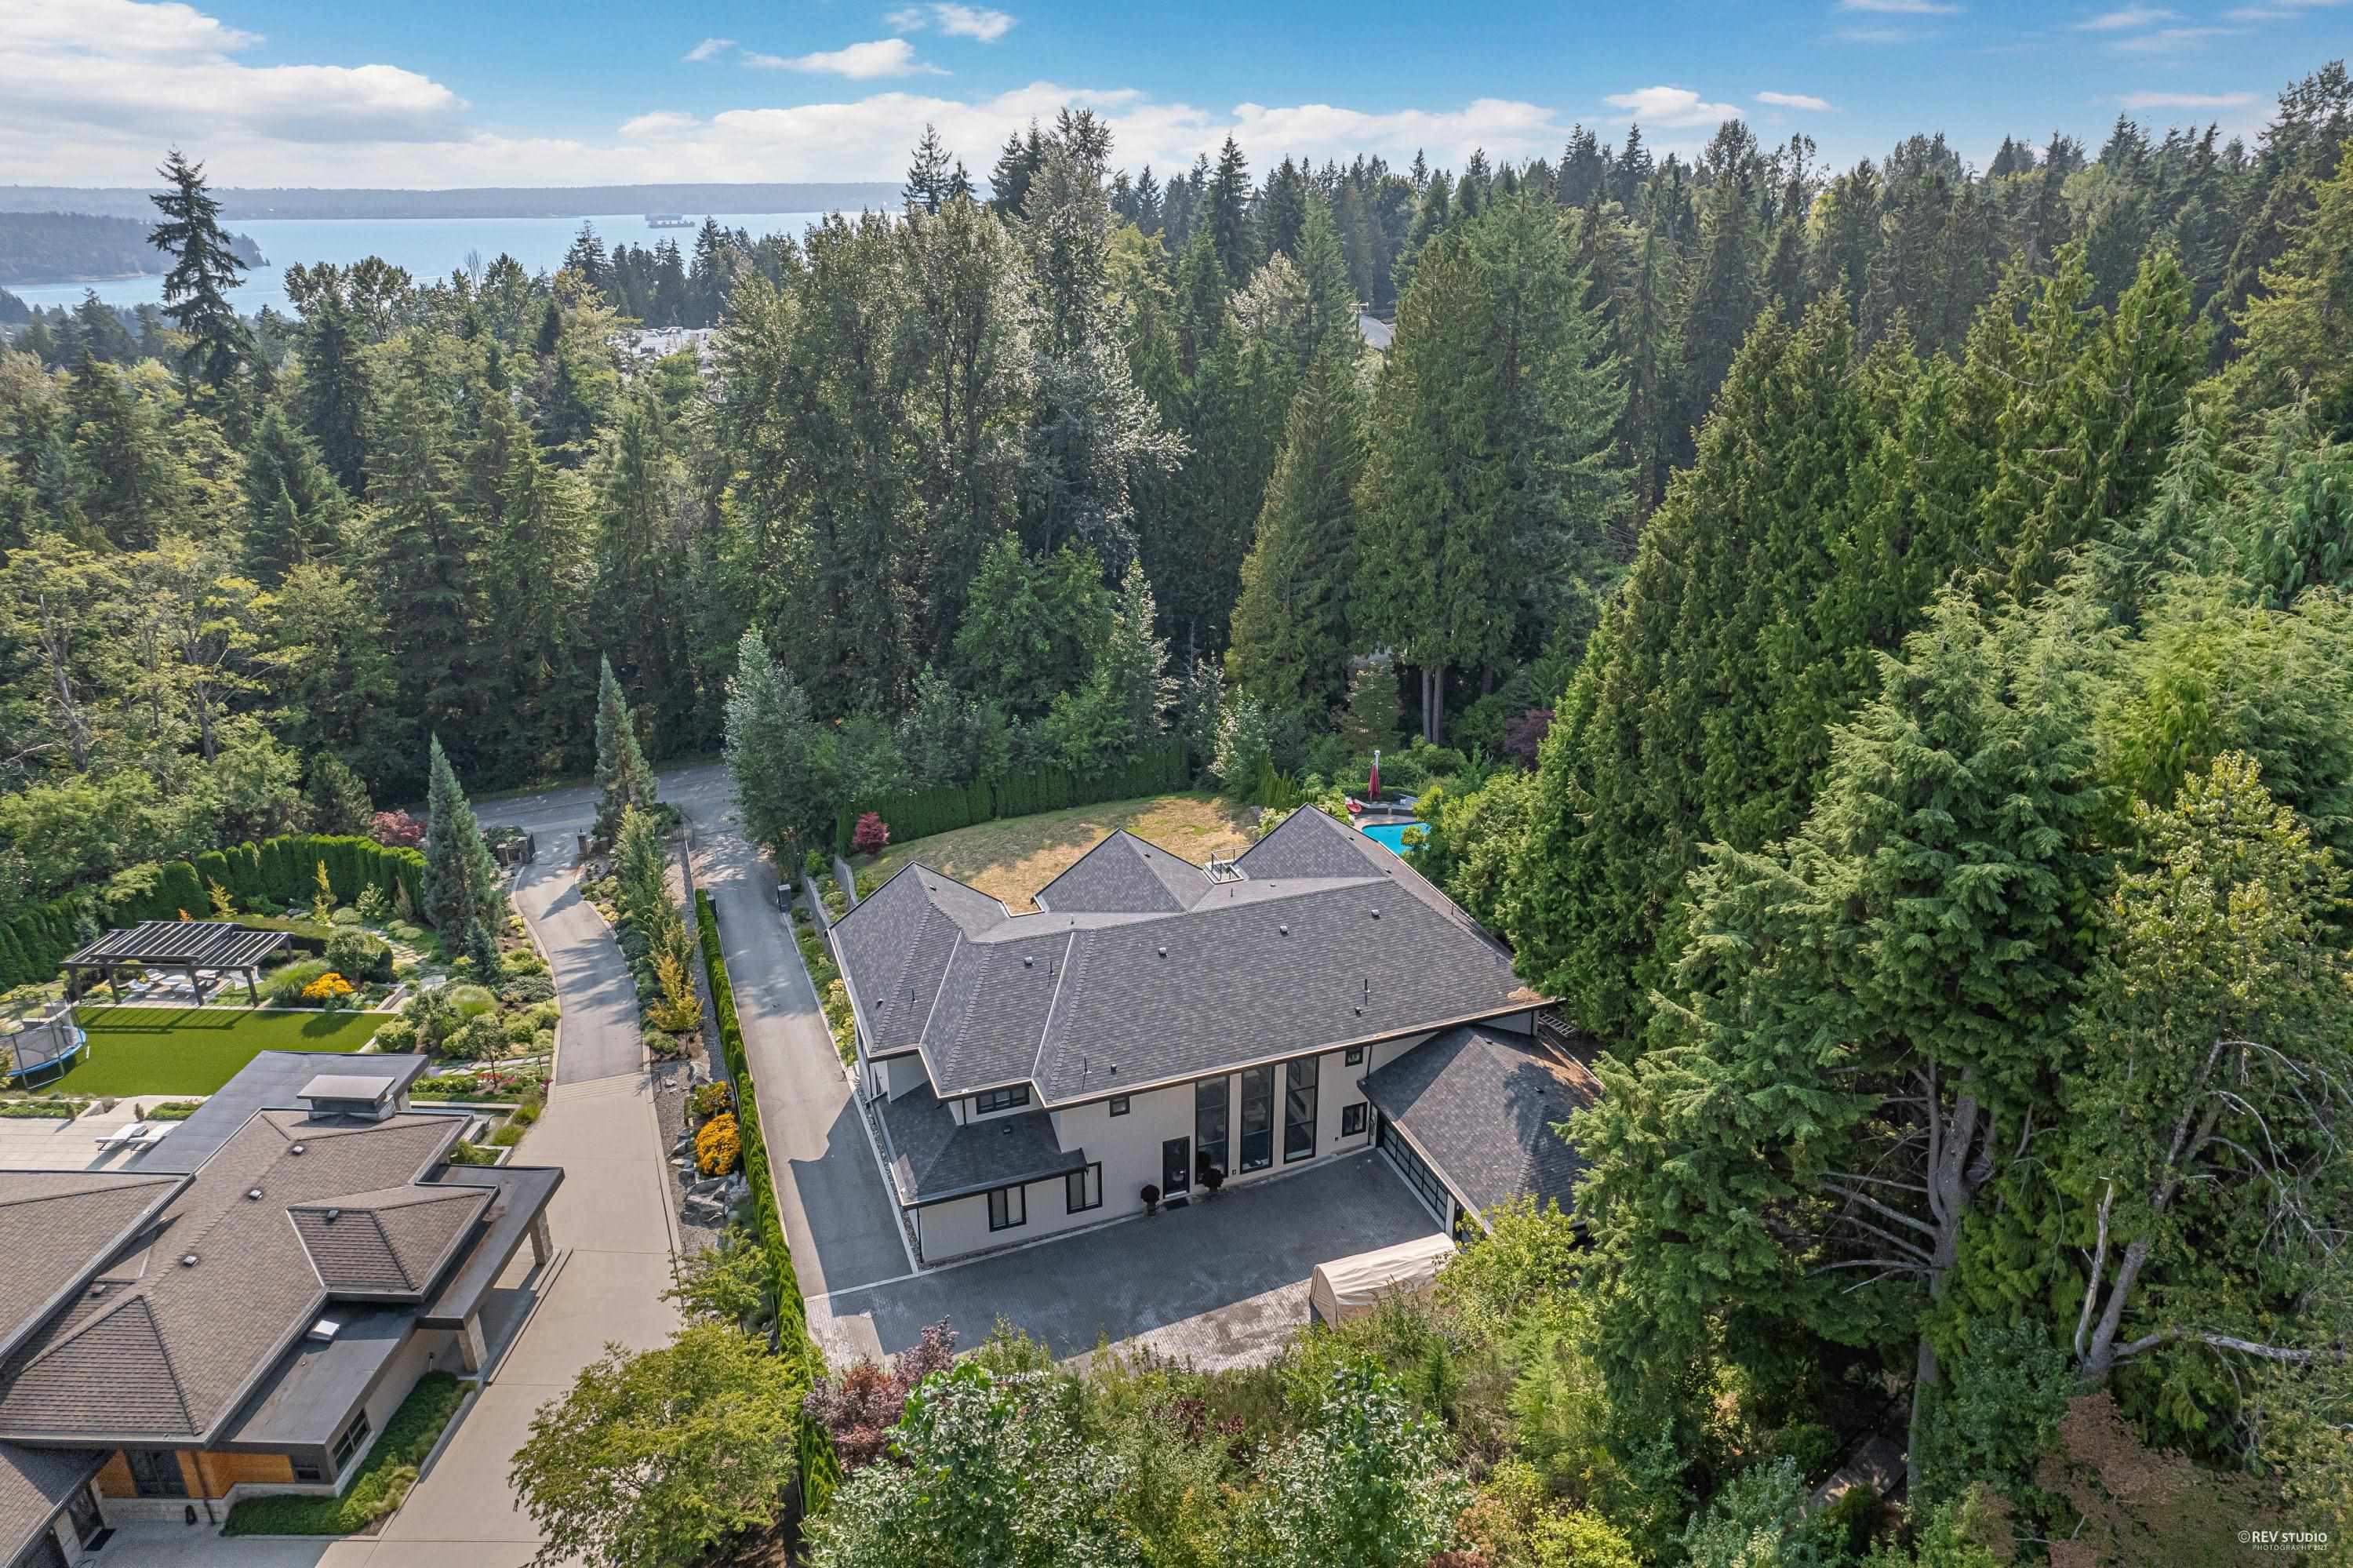 Listing image of 780 EYREMOUNT DRIVE